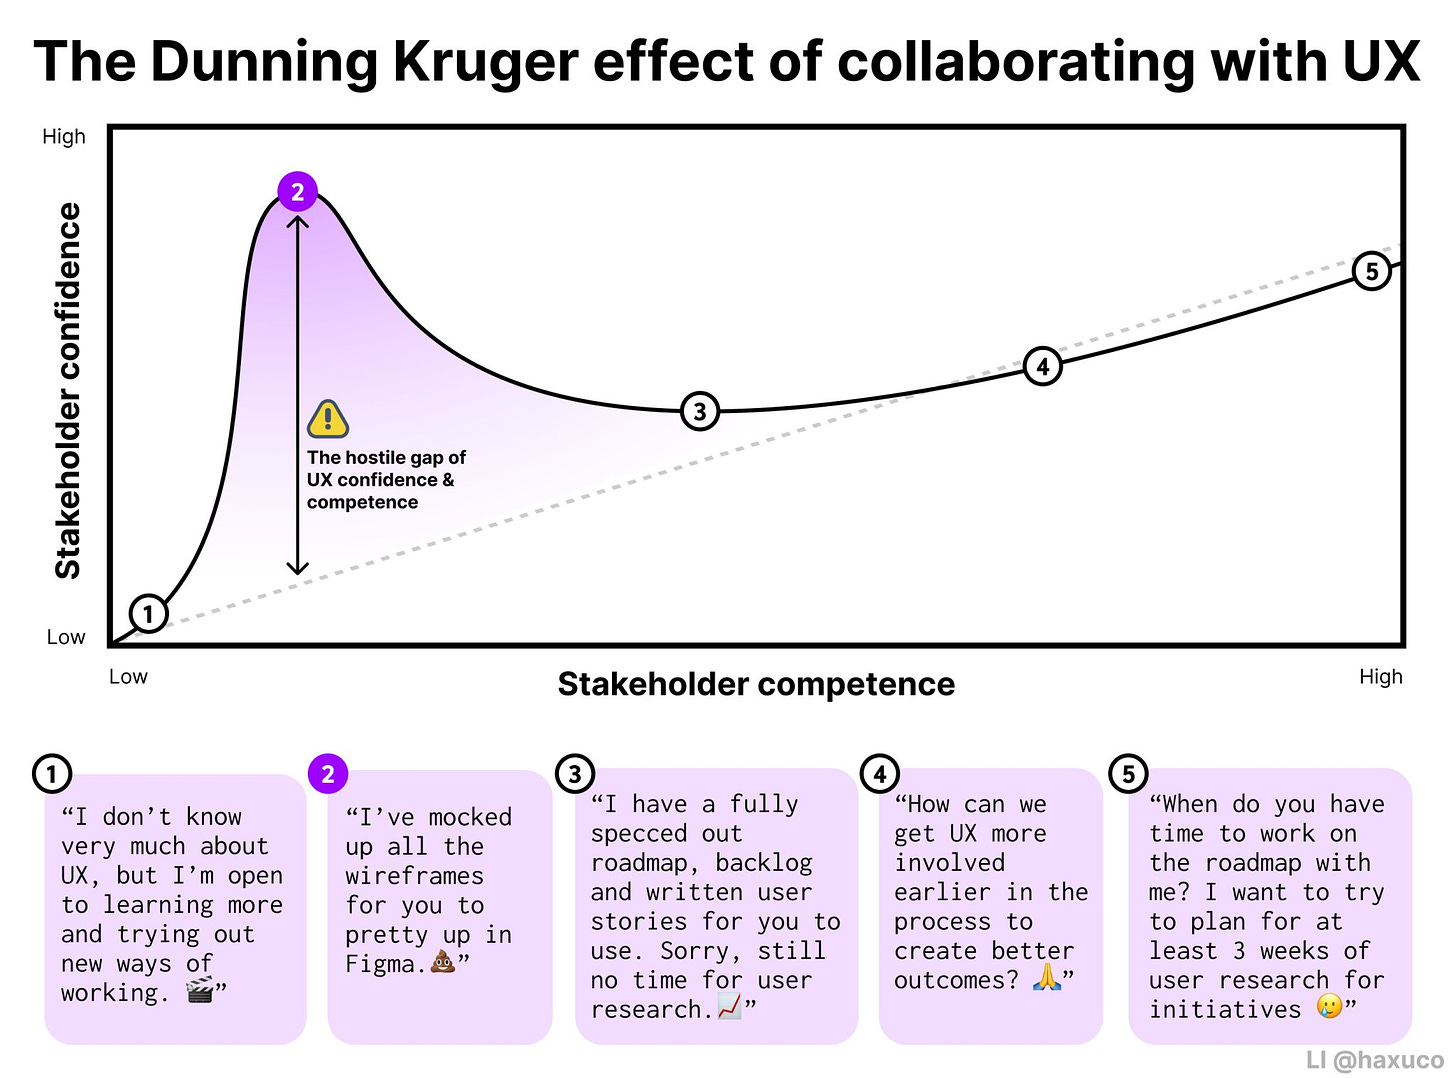 A graph showing the Dunning Kruger effect of collaborating with UX. The graph's Y-axis shows stakeholder confidence from low to high. The X-axis shows stakeholder competence from low to high.

The graph goes from very low to very high, before falling to the middle and growing to the higher end.

There are 4 points on the graph with attached text:

1) located at the start of the graph, very low confidence and competence. It says “I don’t know very much about UX, but I’m open to learning more and trying out new ways of working. 🎬”

2) the second point is located next with high confidence and still low competence. It says: “I’ve mocked up all the wireframes for you to pretty up in Figma.💩”

3) the 3rd point is located next with mid confidence and mid competence. “I have a fully specced out roadmap, backlog and written user stories for you to use. Sorry, still no time for user research.📈”
